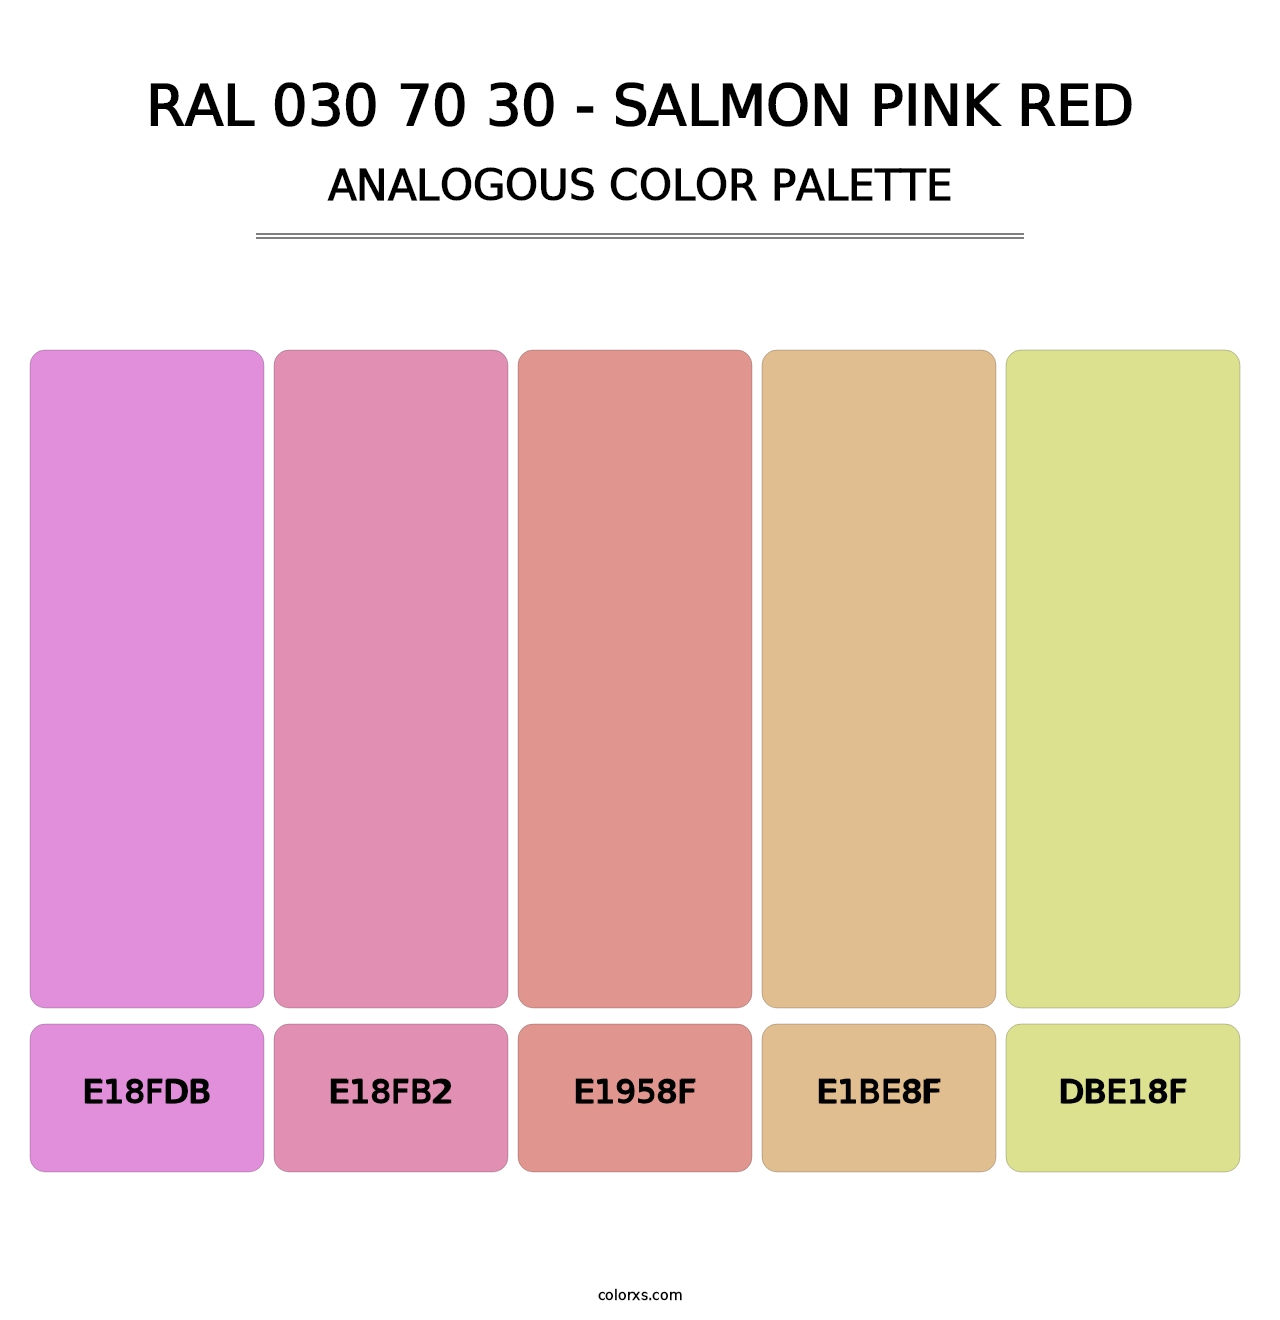 RAL 030 70 30 - Salmon Pink Red - Analogous Color Palette